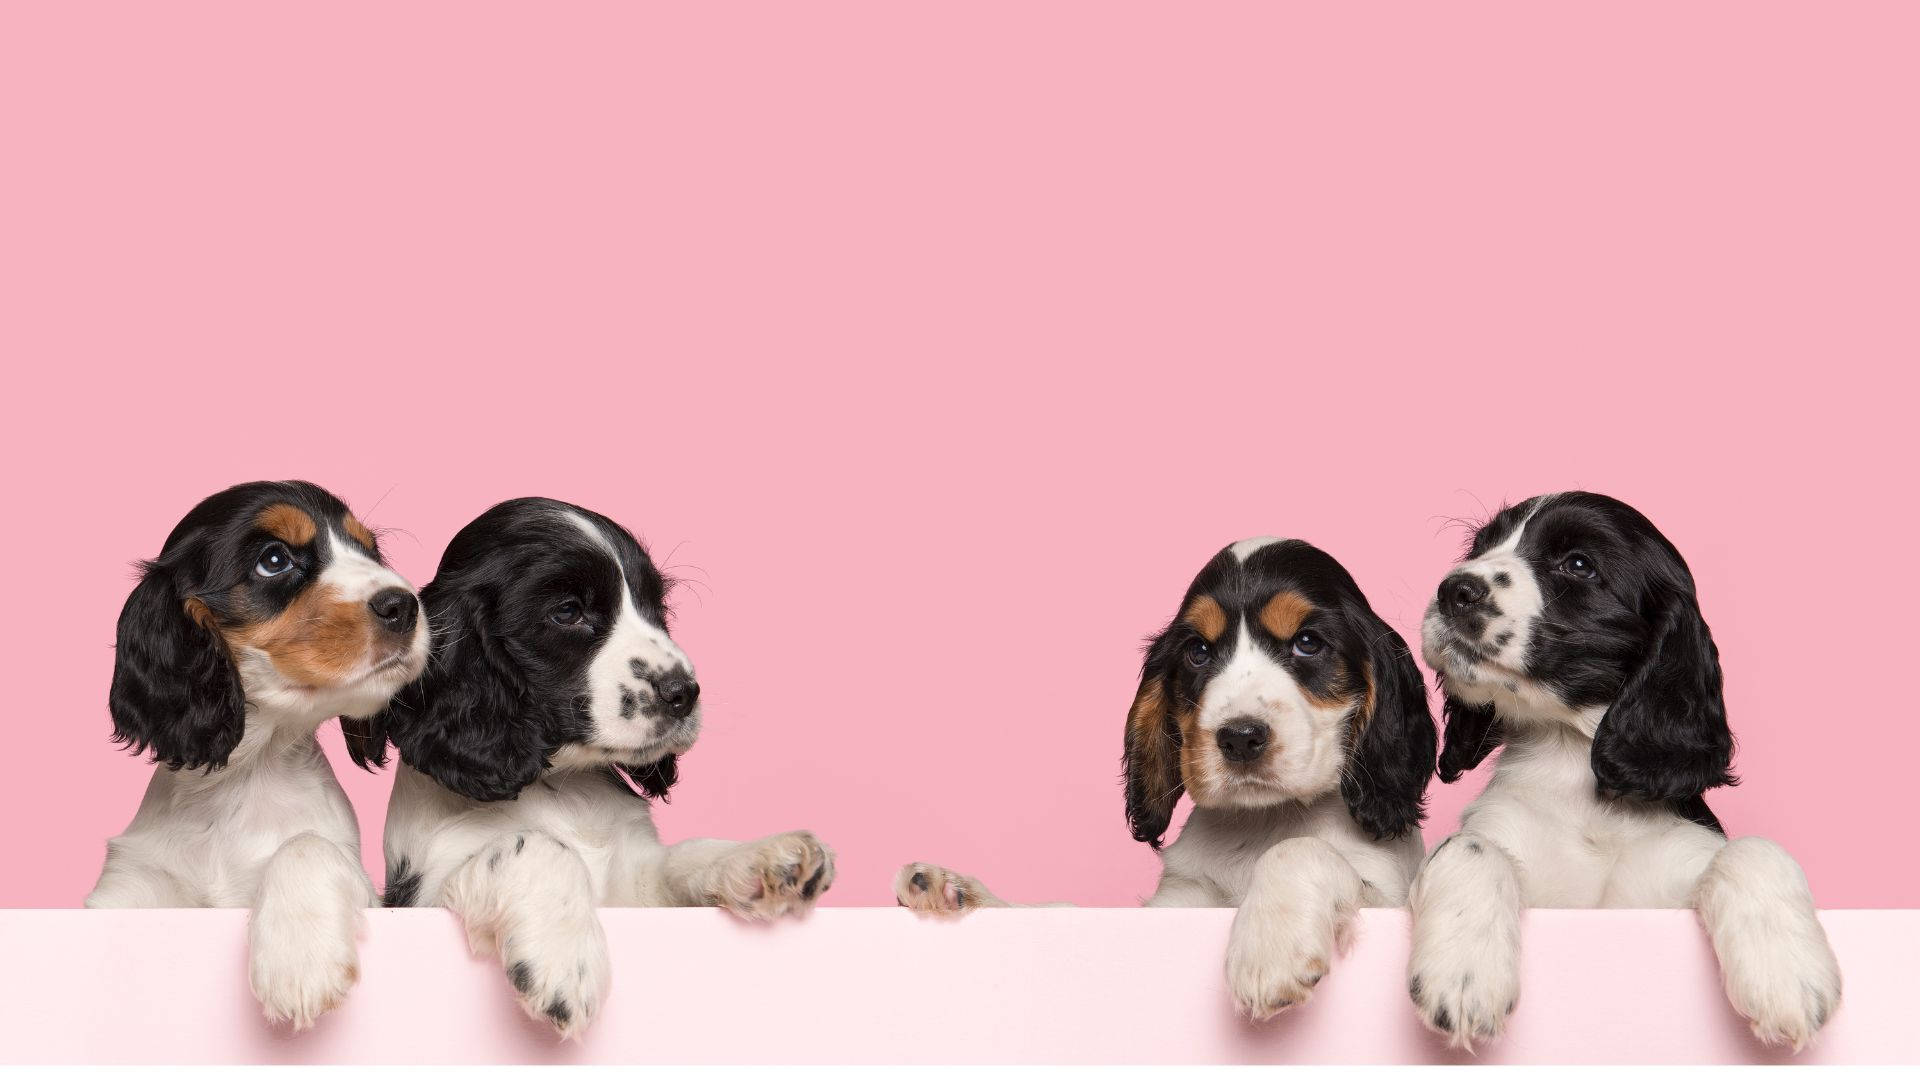 Spaniel Baby Dogs In Pink Room Wallpaper